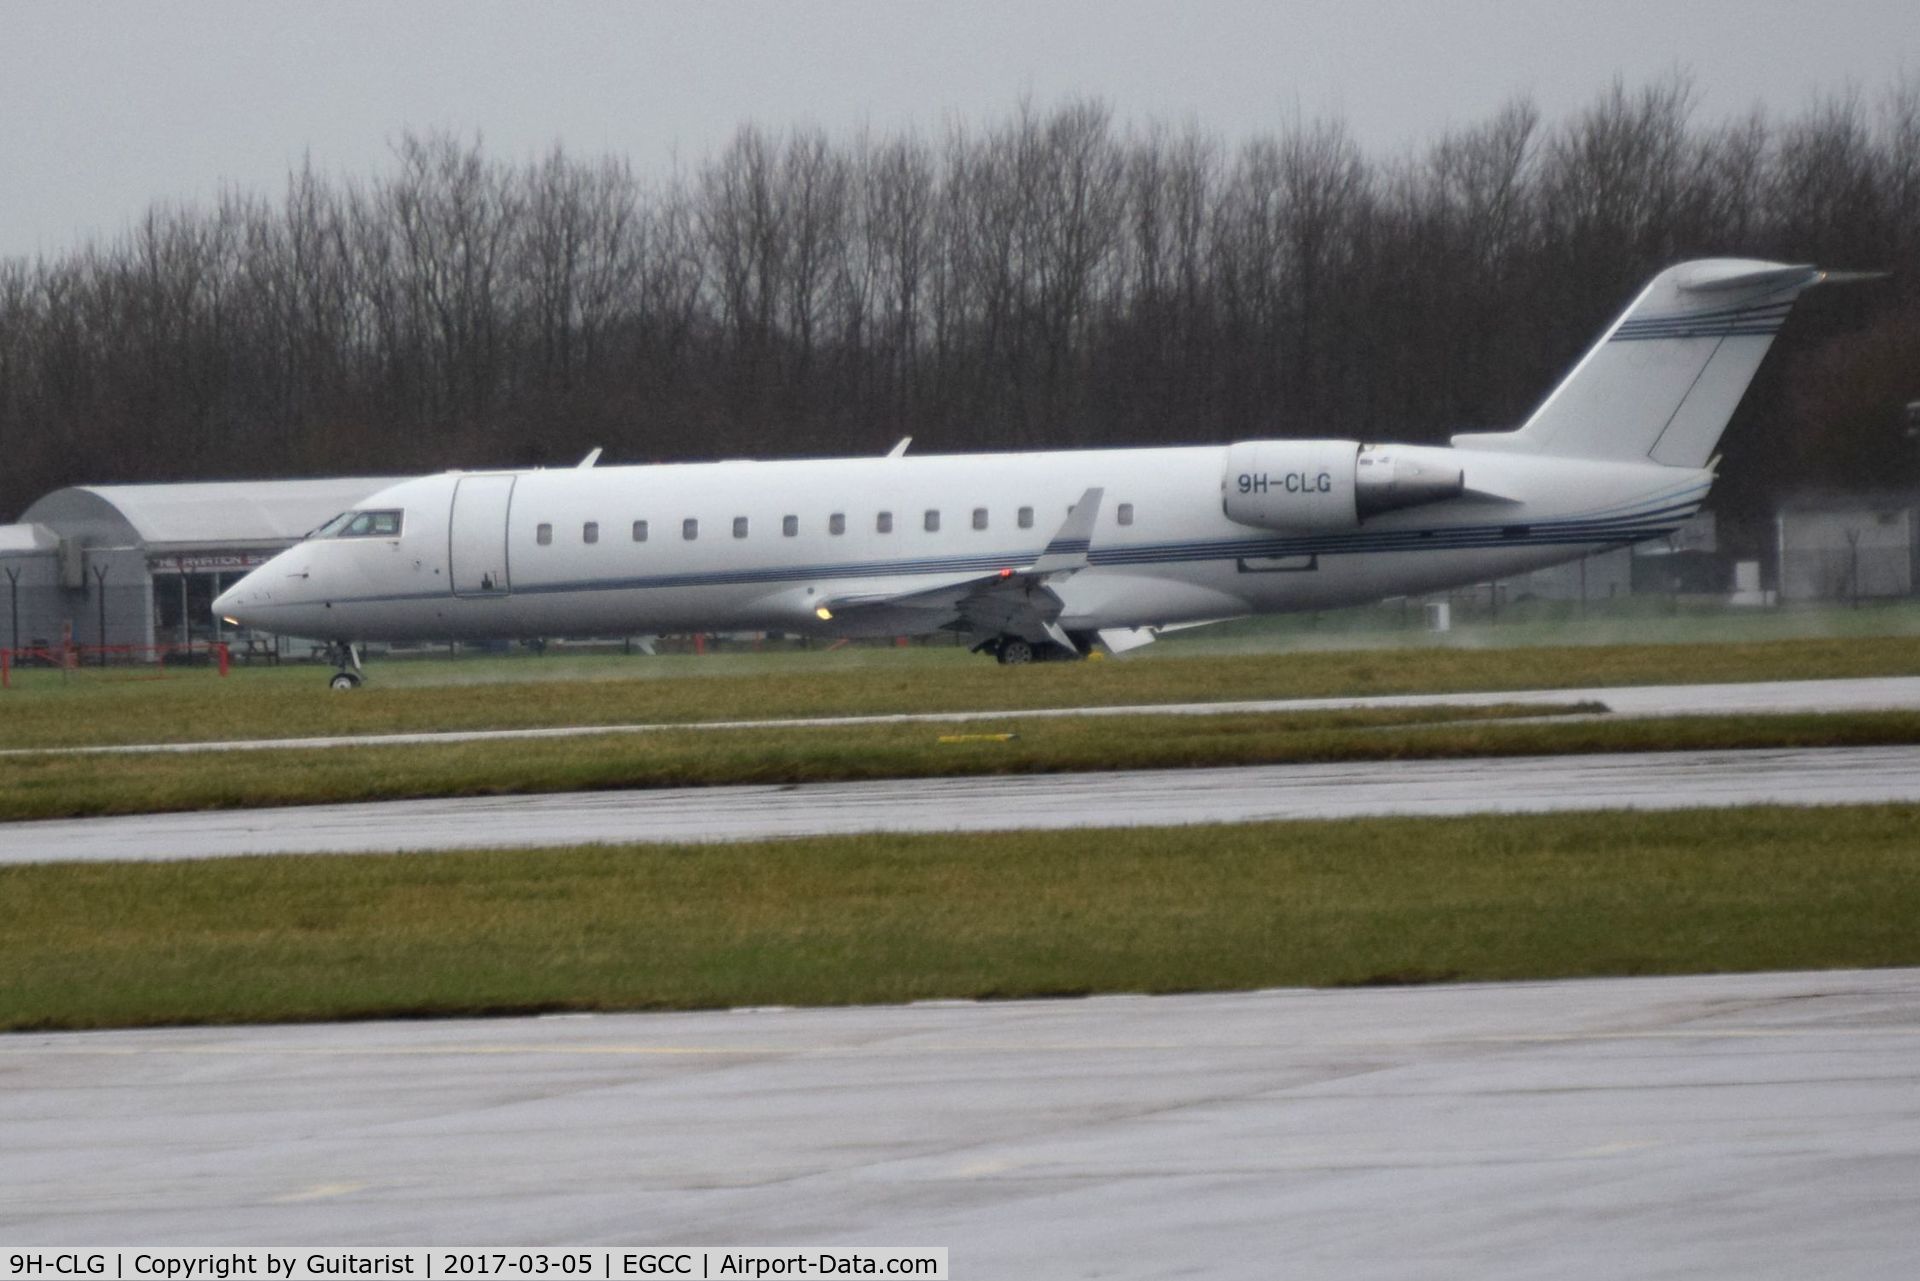 9H-CLG, 2006 Bombardier Challenger 850 (CL-600-2B19) C/N 8063, At Manchester